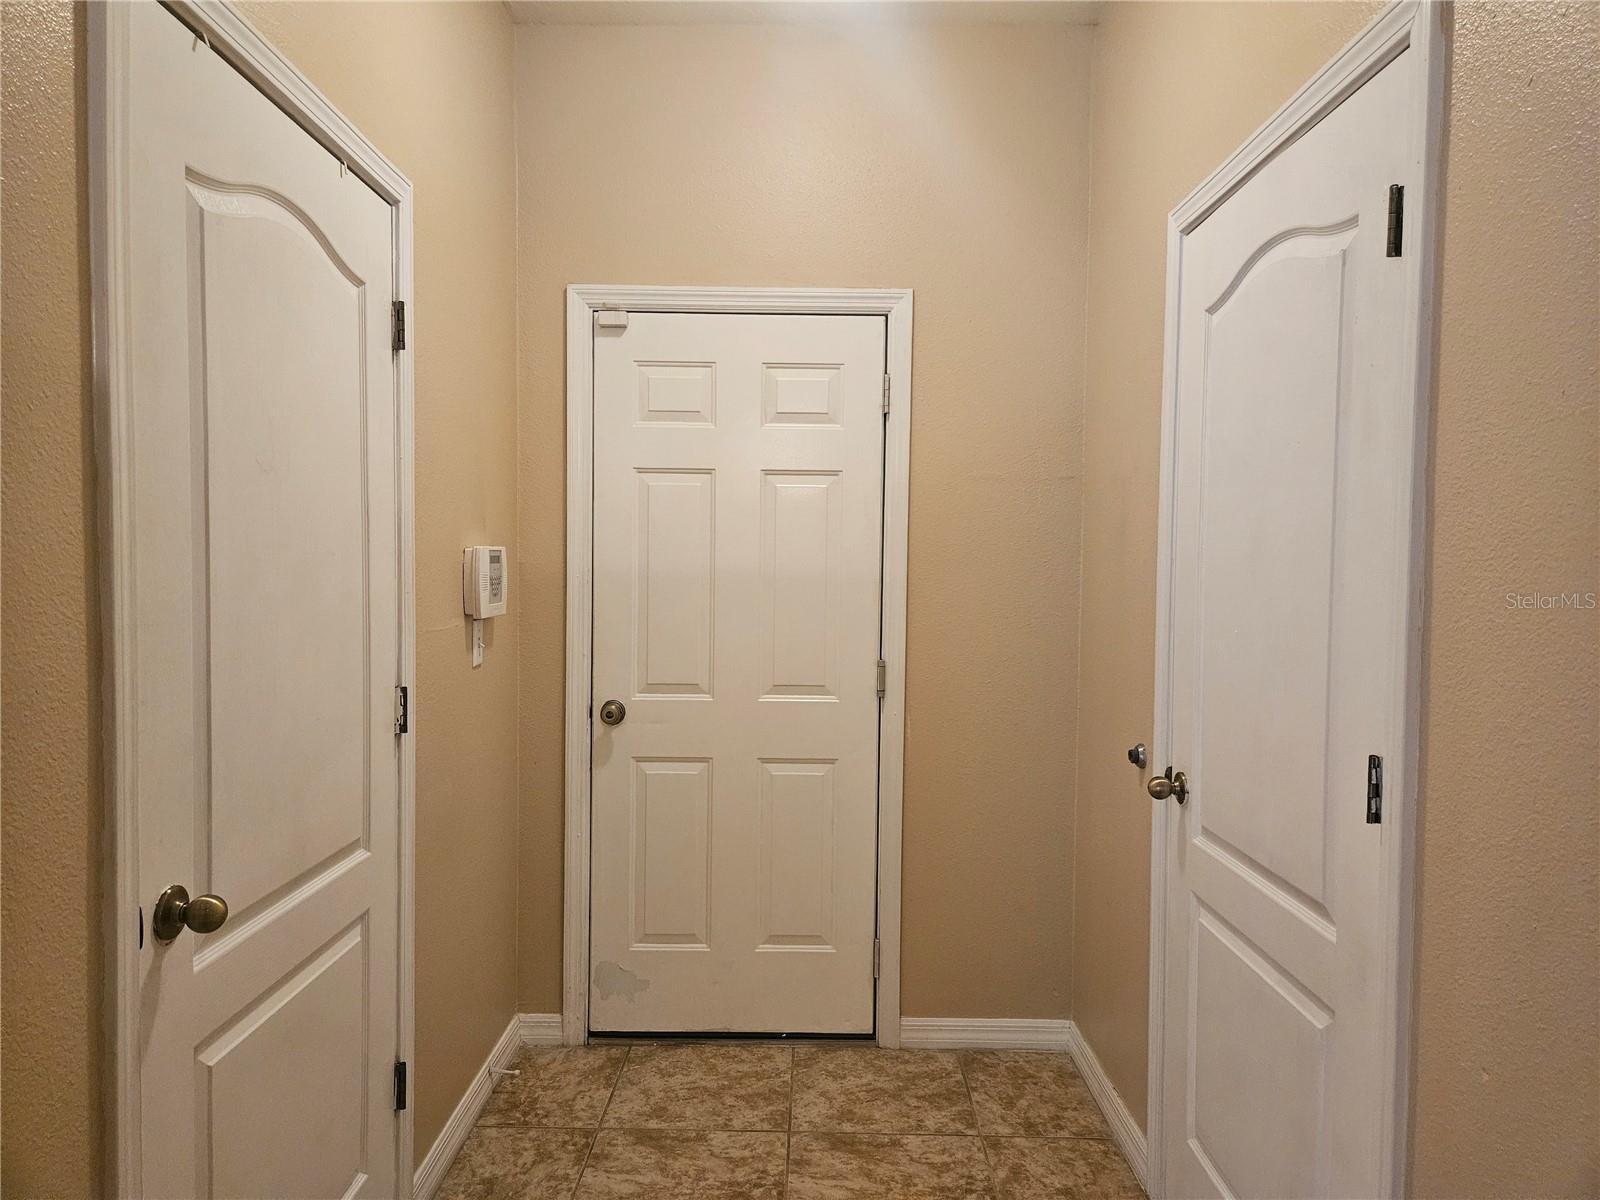 Downstairs Hall with Laundry Room and Half Bath